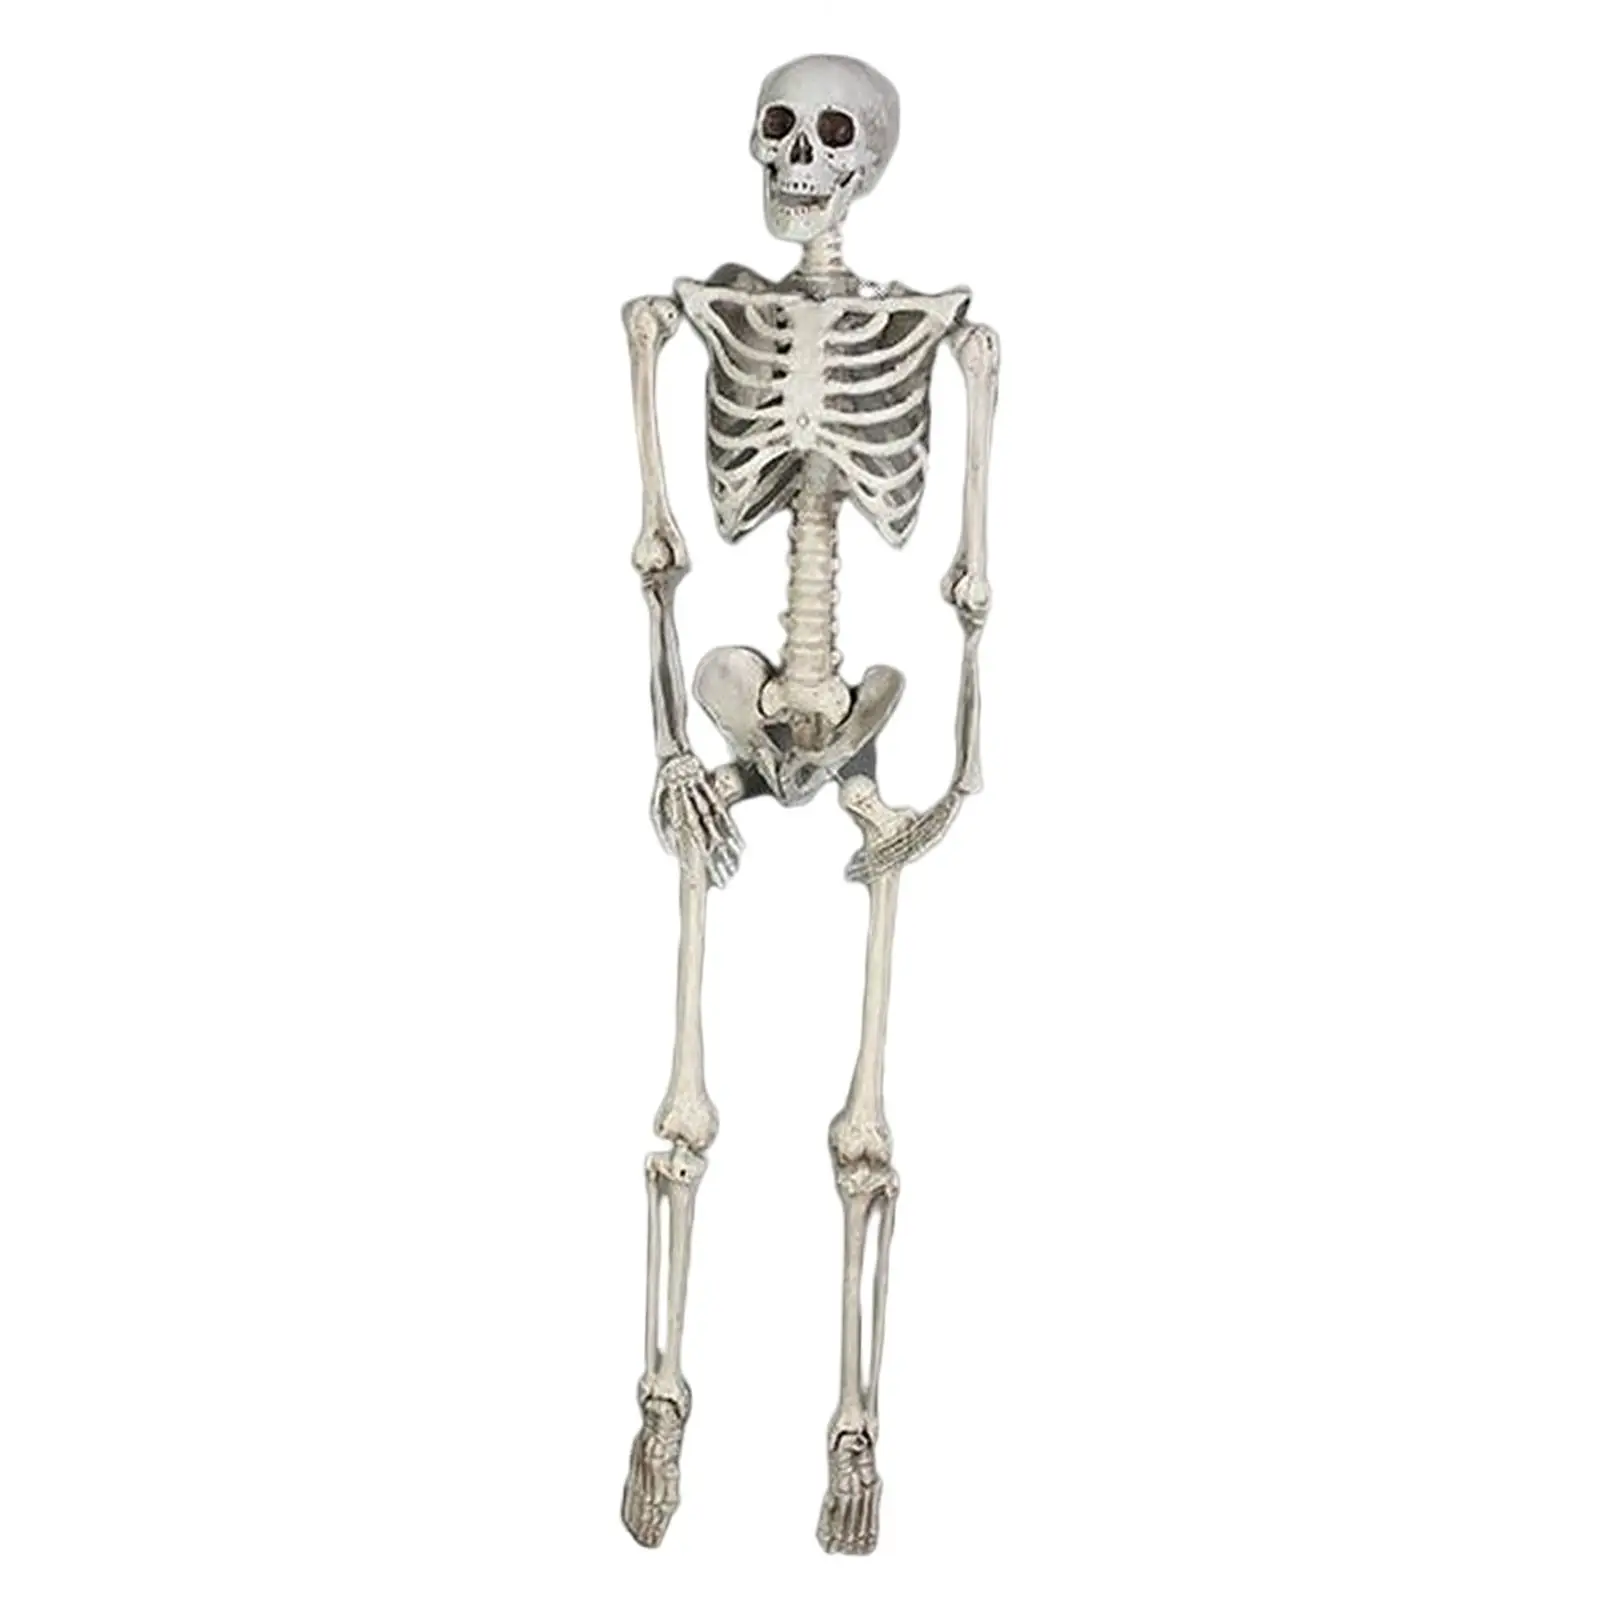 185cm Simulation Skeleton Decor Gifts Artwork Scene Layout Accs Halloween Props for Office Desktop Holiday Themed Parties Porch